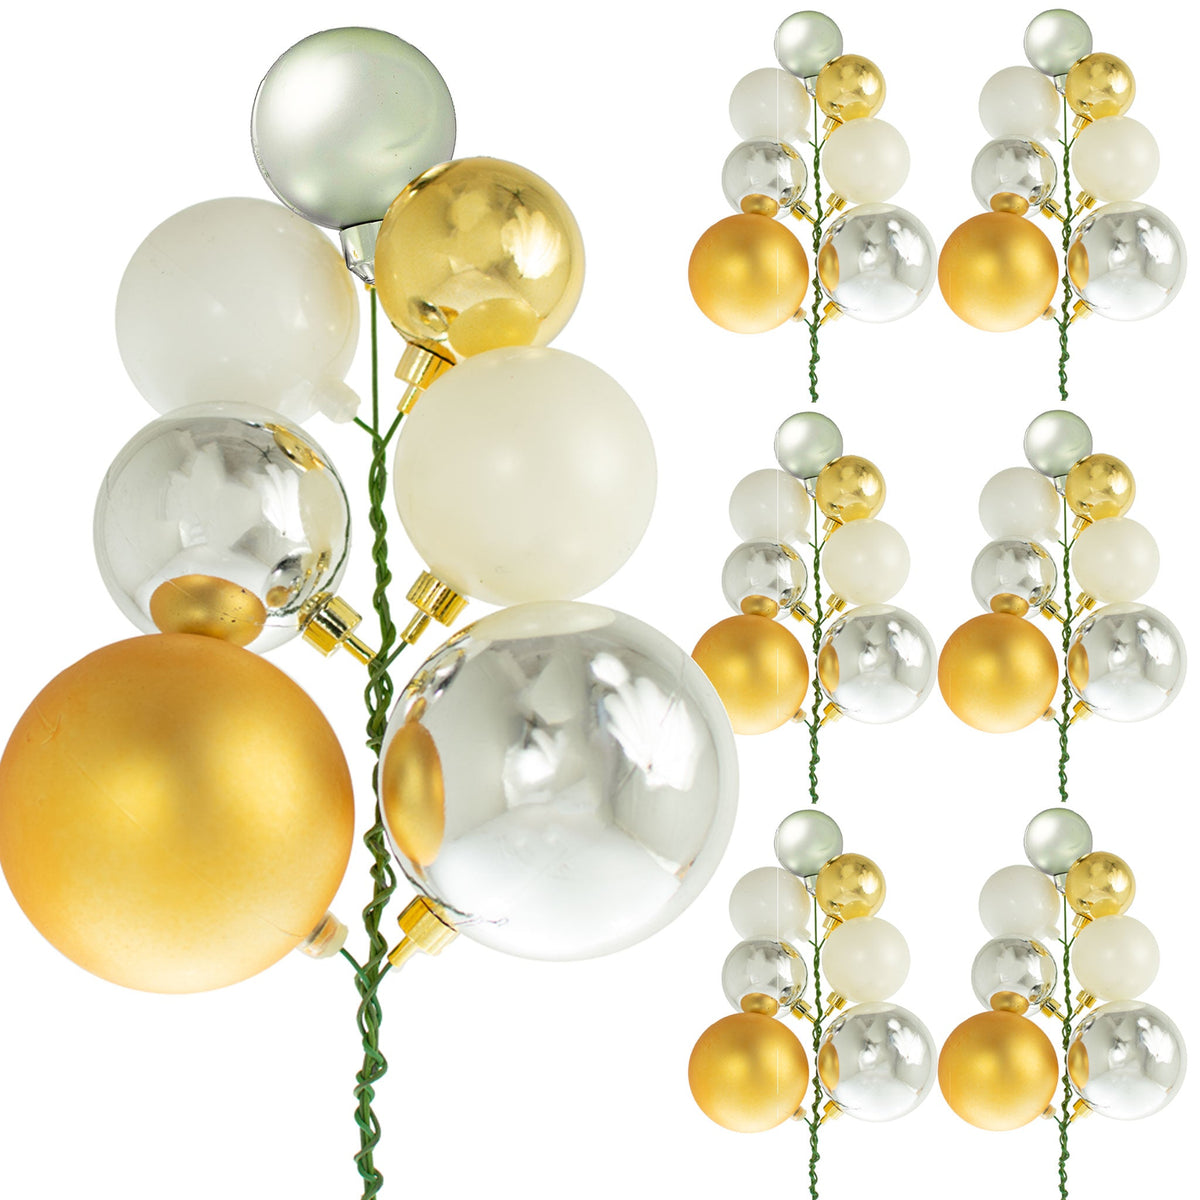 The Gold and Silver Christmas Ball Ornament Clusters are sold in sets of 6 from leedisplay.com